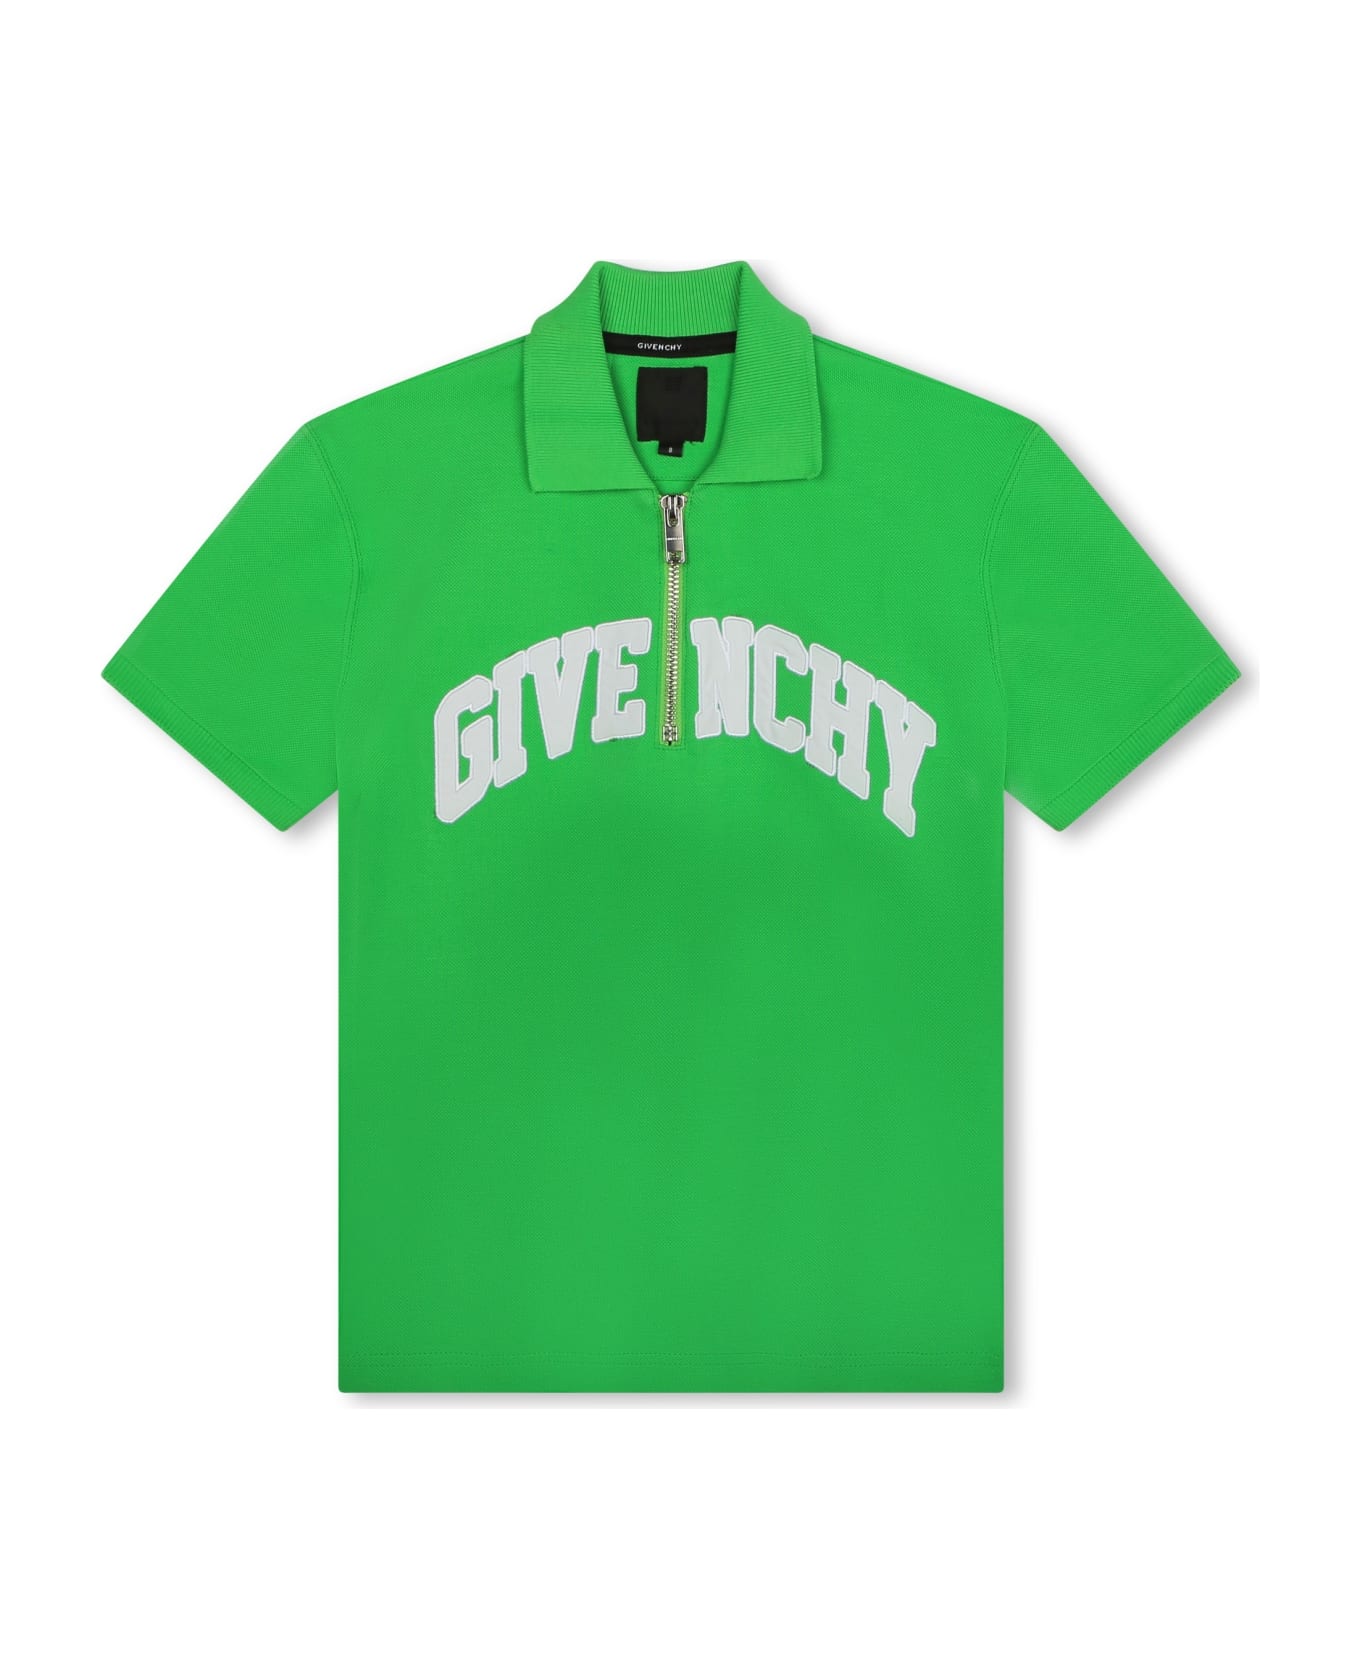 Givenchy Polo Shirt With Embroidery - Green アクセサリー＆ギフト